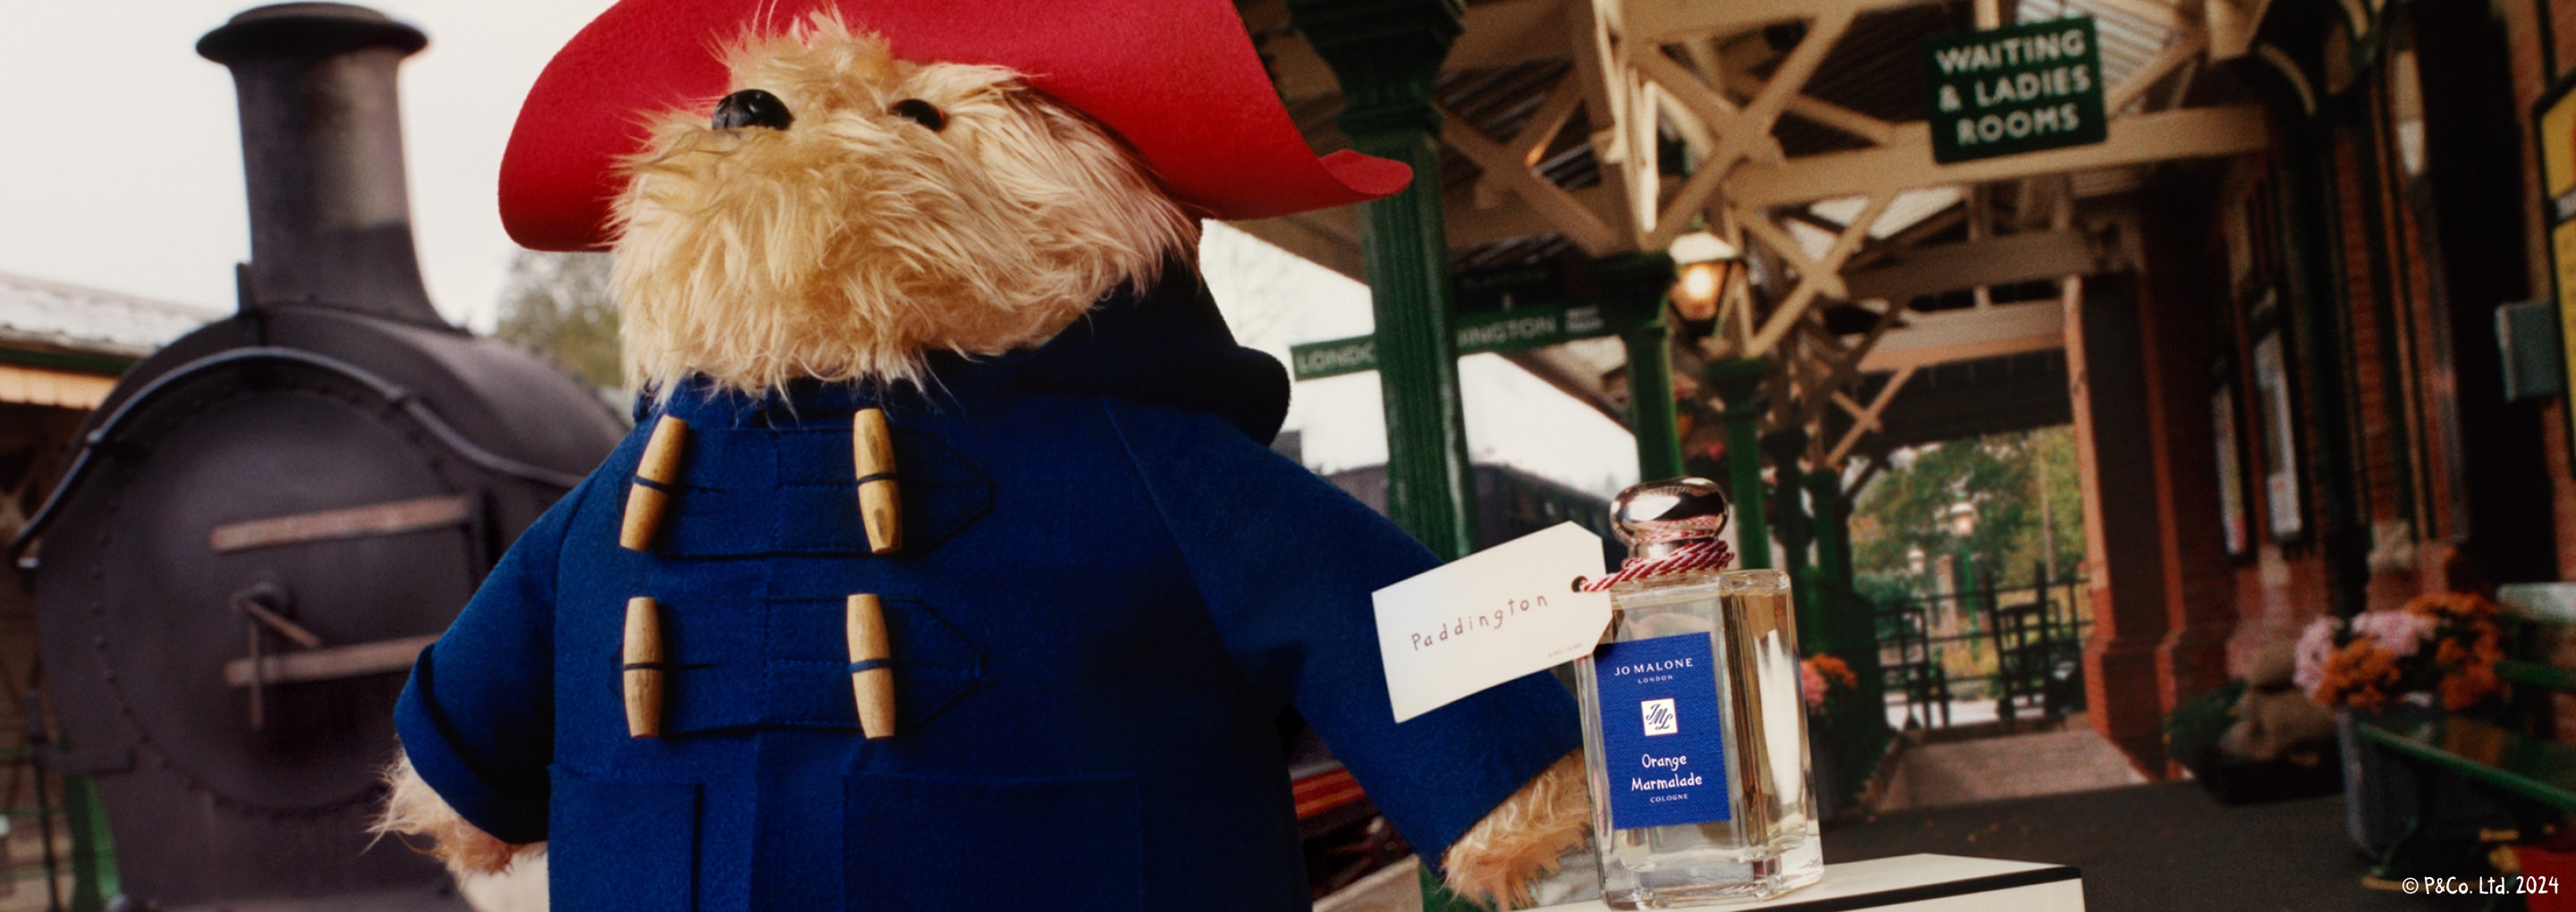 Paddington Bear and Orange Marmalade Cologne with a Paddington tag hanging from the clear, glass bottle in a train station 